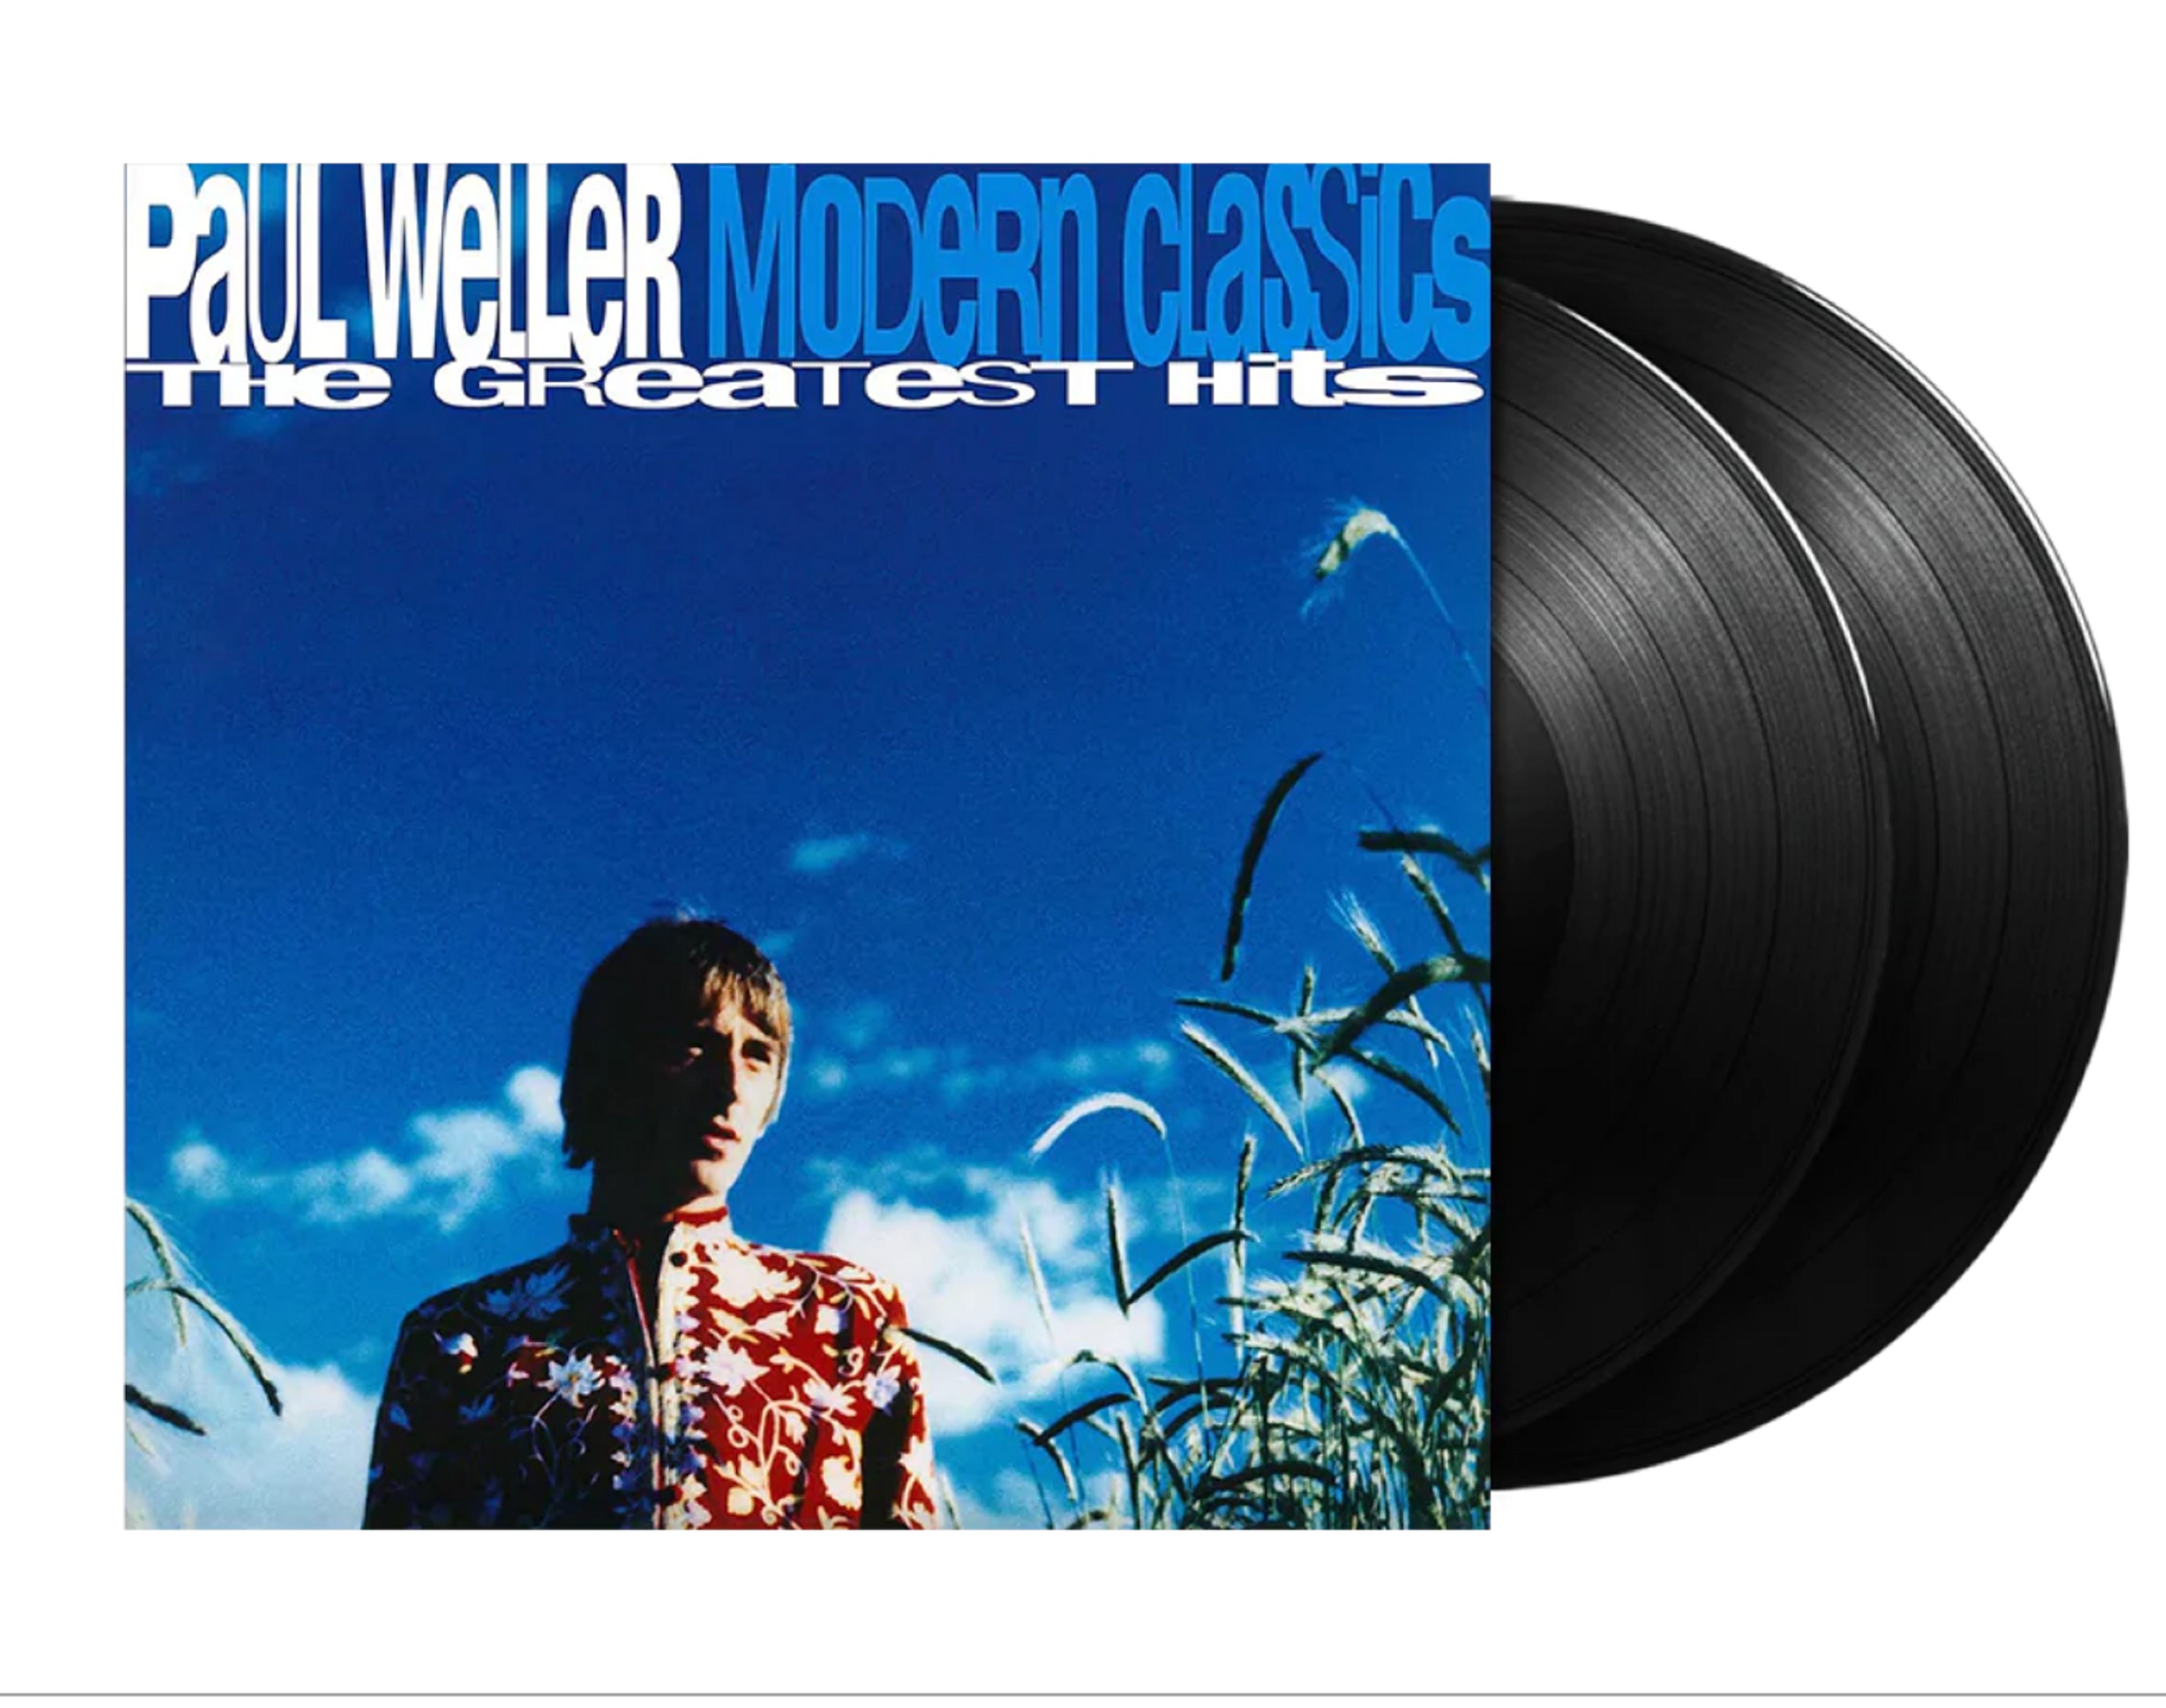 Paul Weller’s ‘Modern Classics’ Re-issue Released October 14, 2022